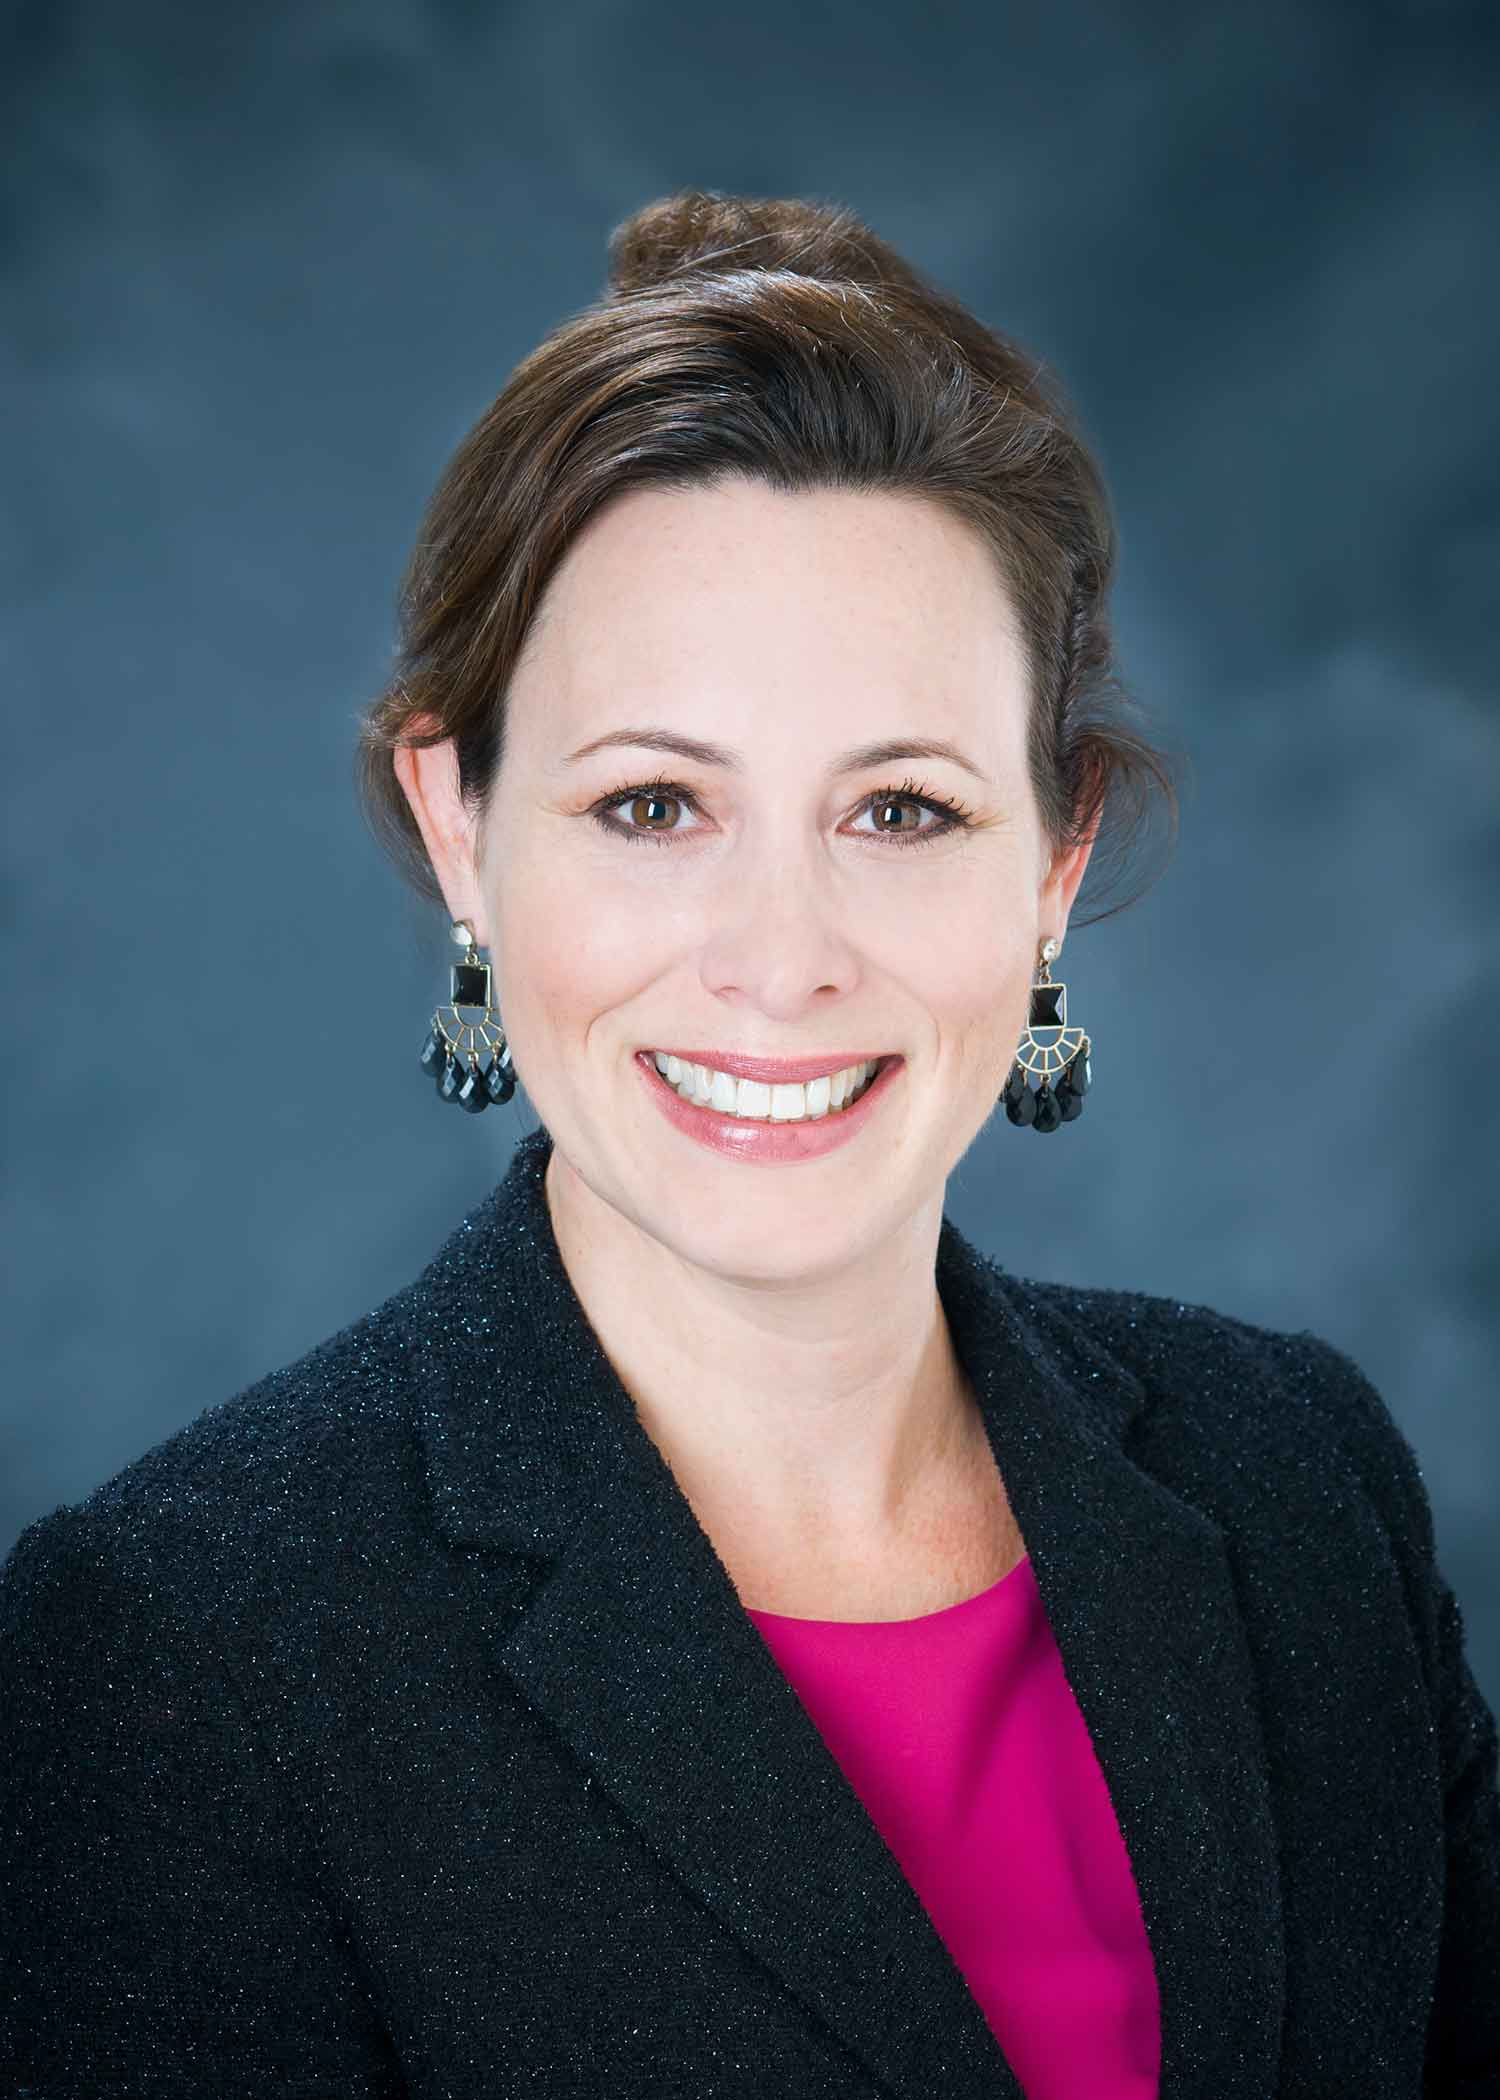 Professional photo of Christa Haney, wearing a pink blouse and dark blazer against a blue background.